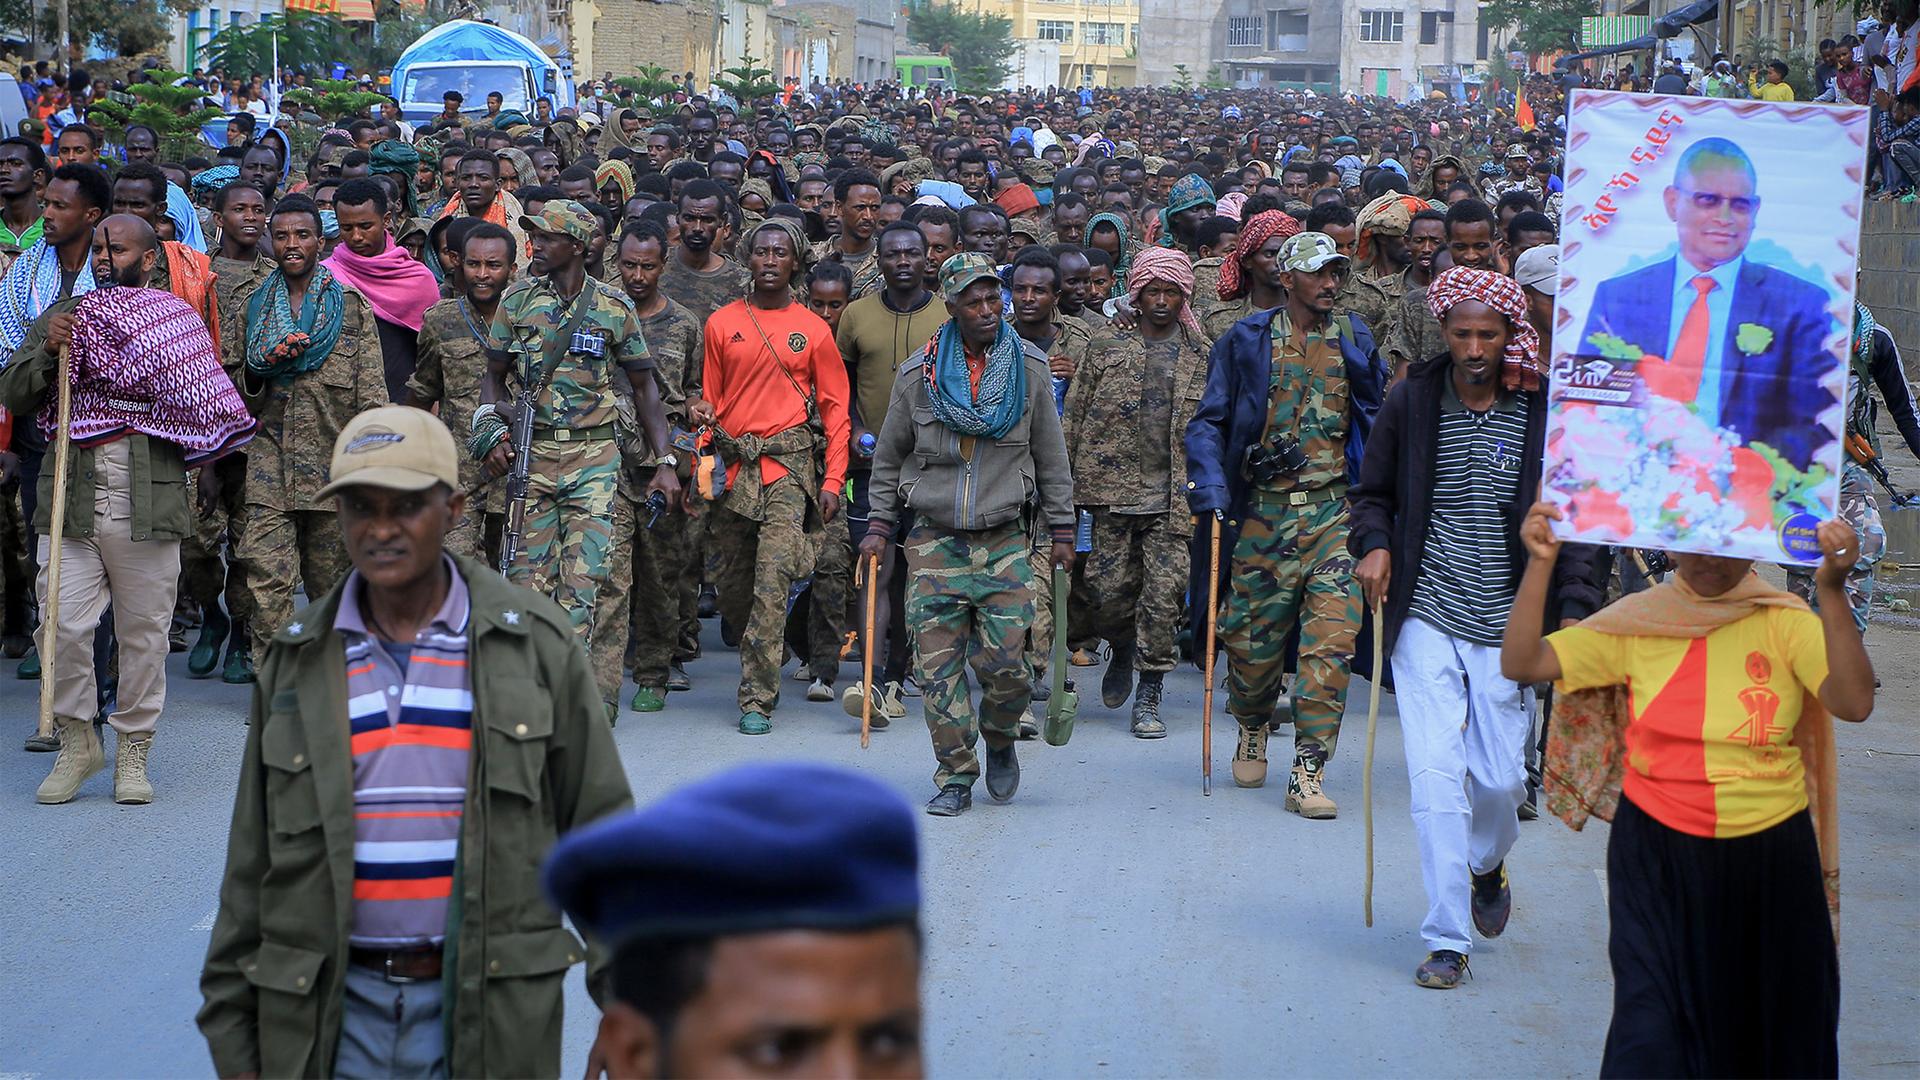 Captured members of the Ethiopian National Defense Force are marched through the streets to prison under guard by Tigray Forces